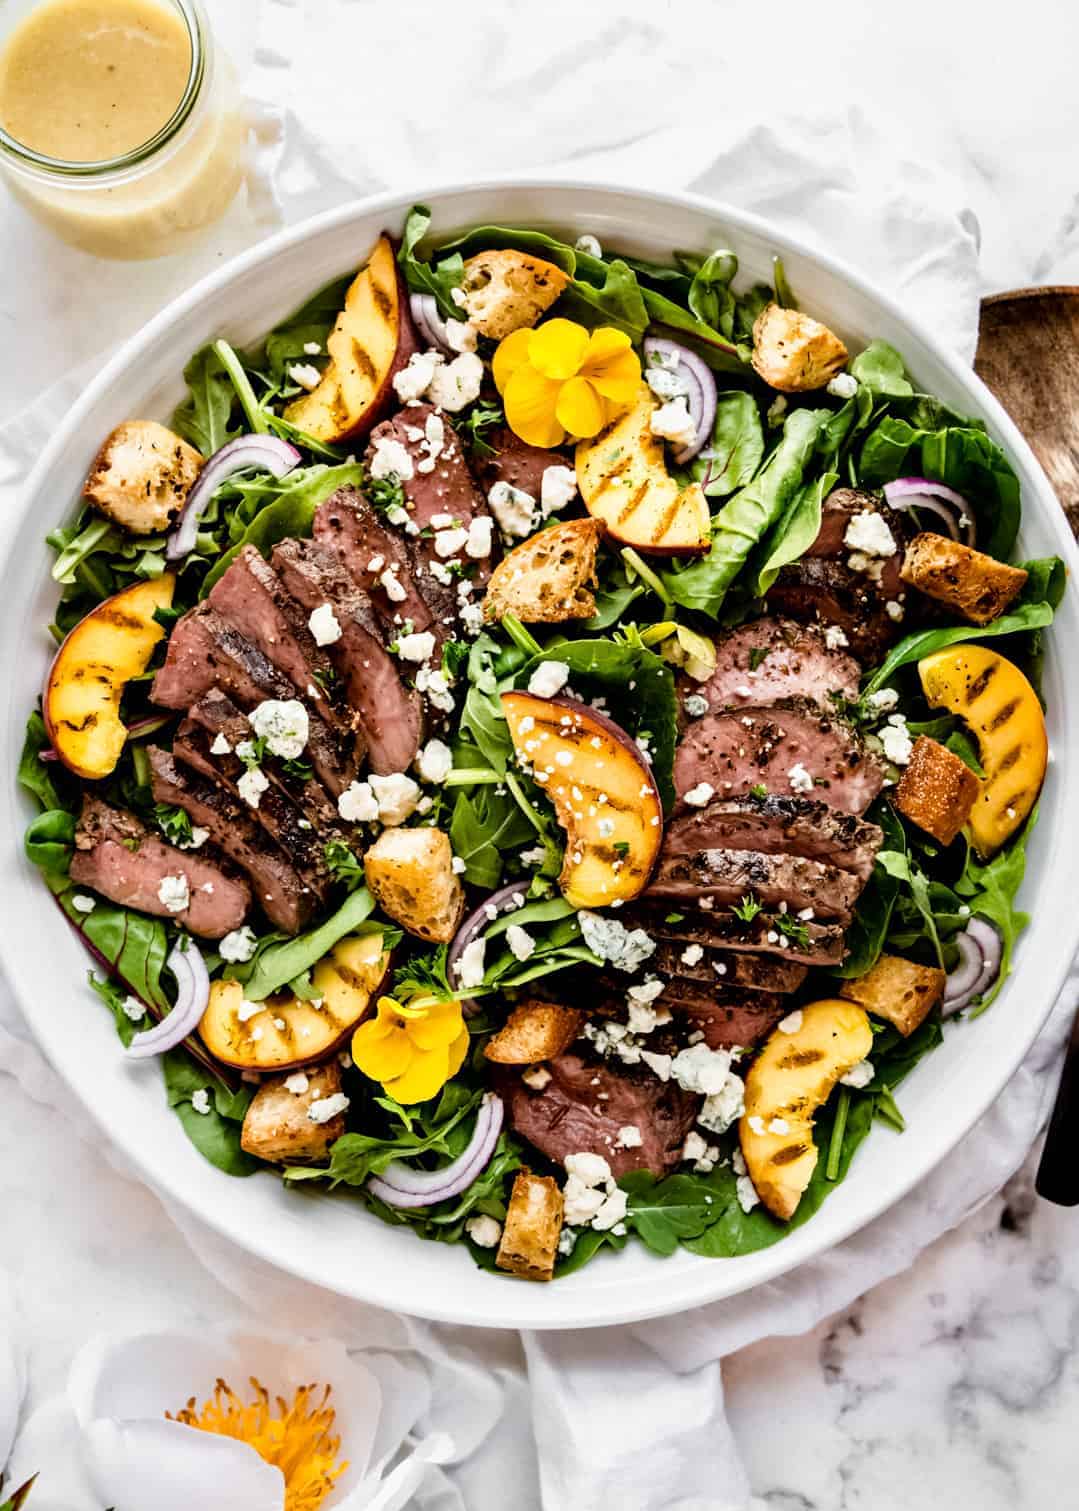 Grilled Peach and Steak Salad